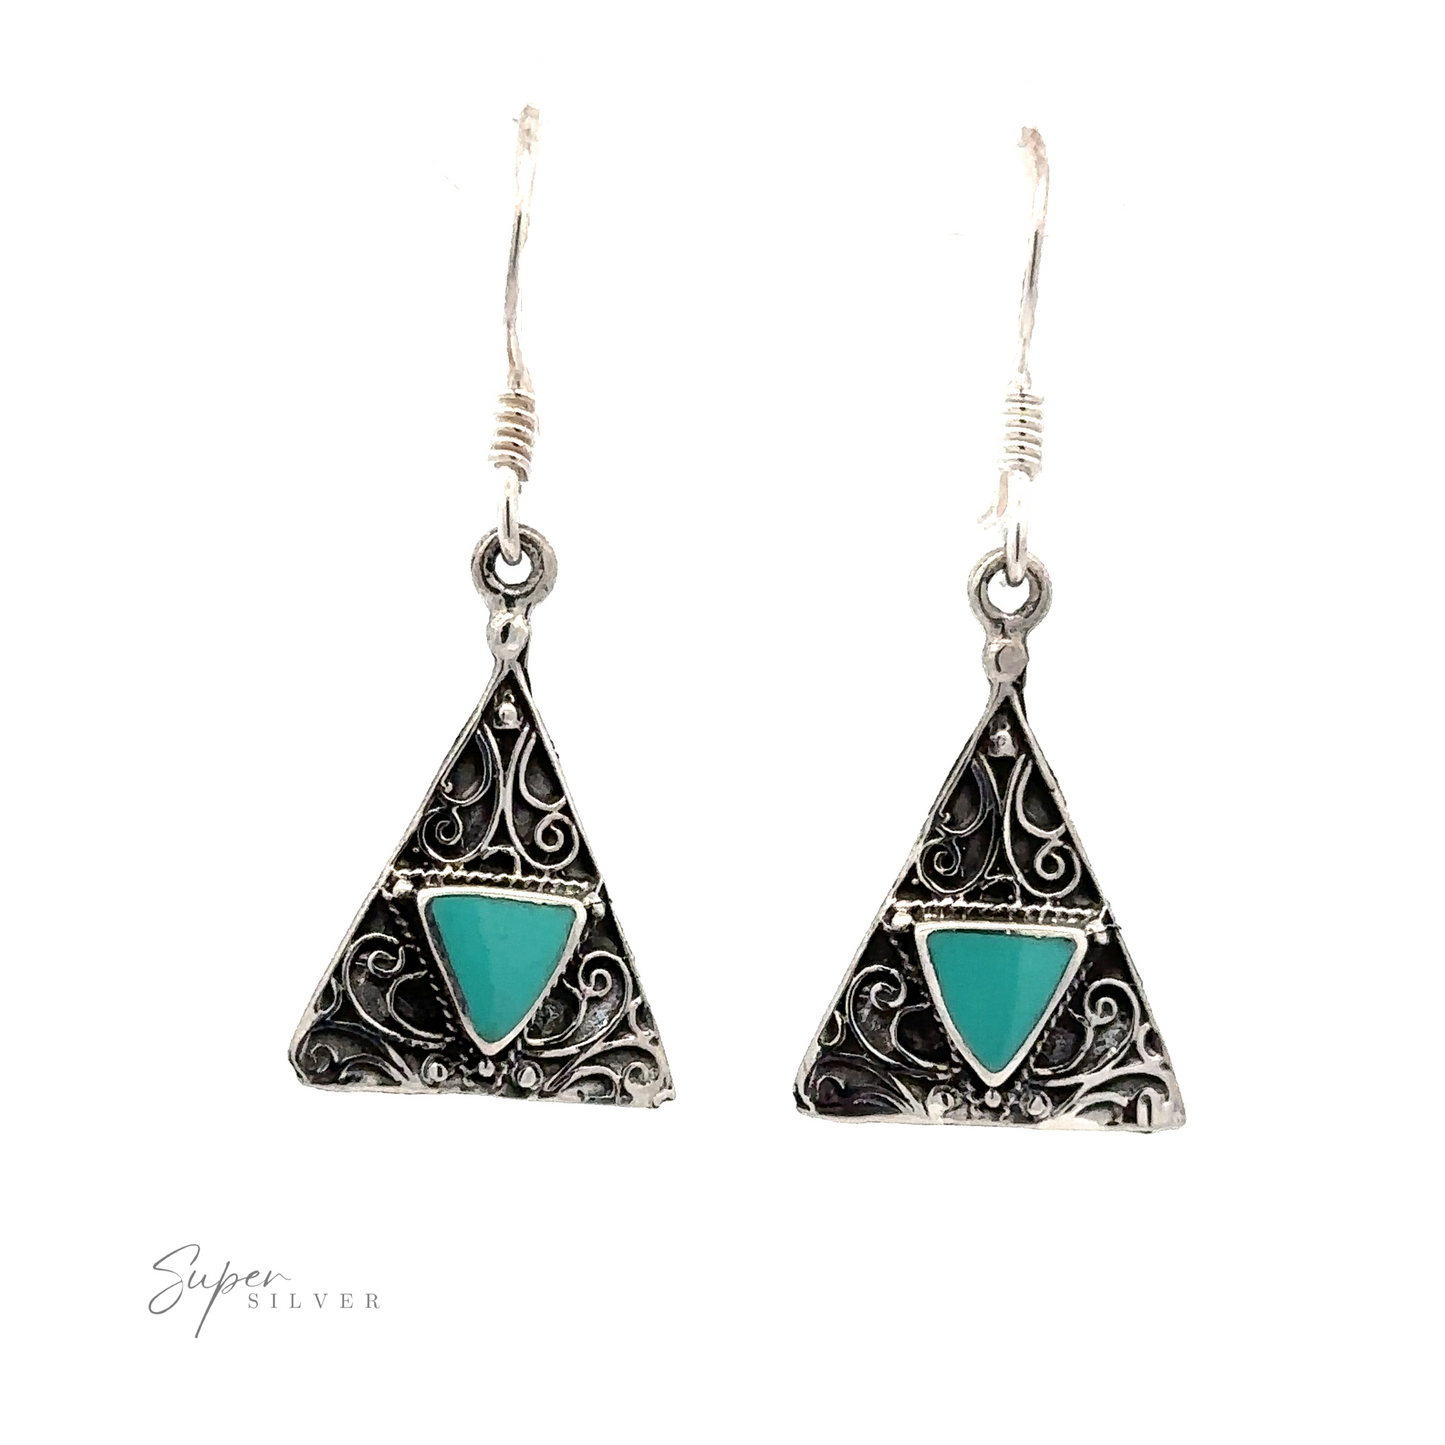 
                  
                    Pair of Freestyle Design Triangle Shape Inlaid Earrings with intricate swirl designs and teal triangular accents set in triangle-shaped silver settings, featuring hooks for wearing.
                  
                